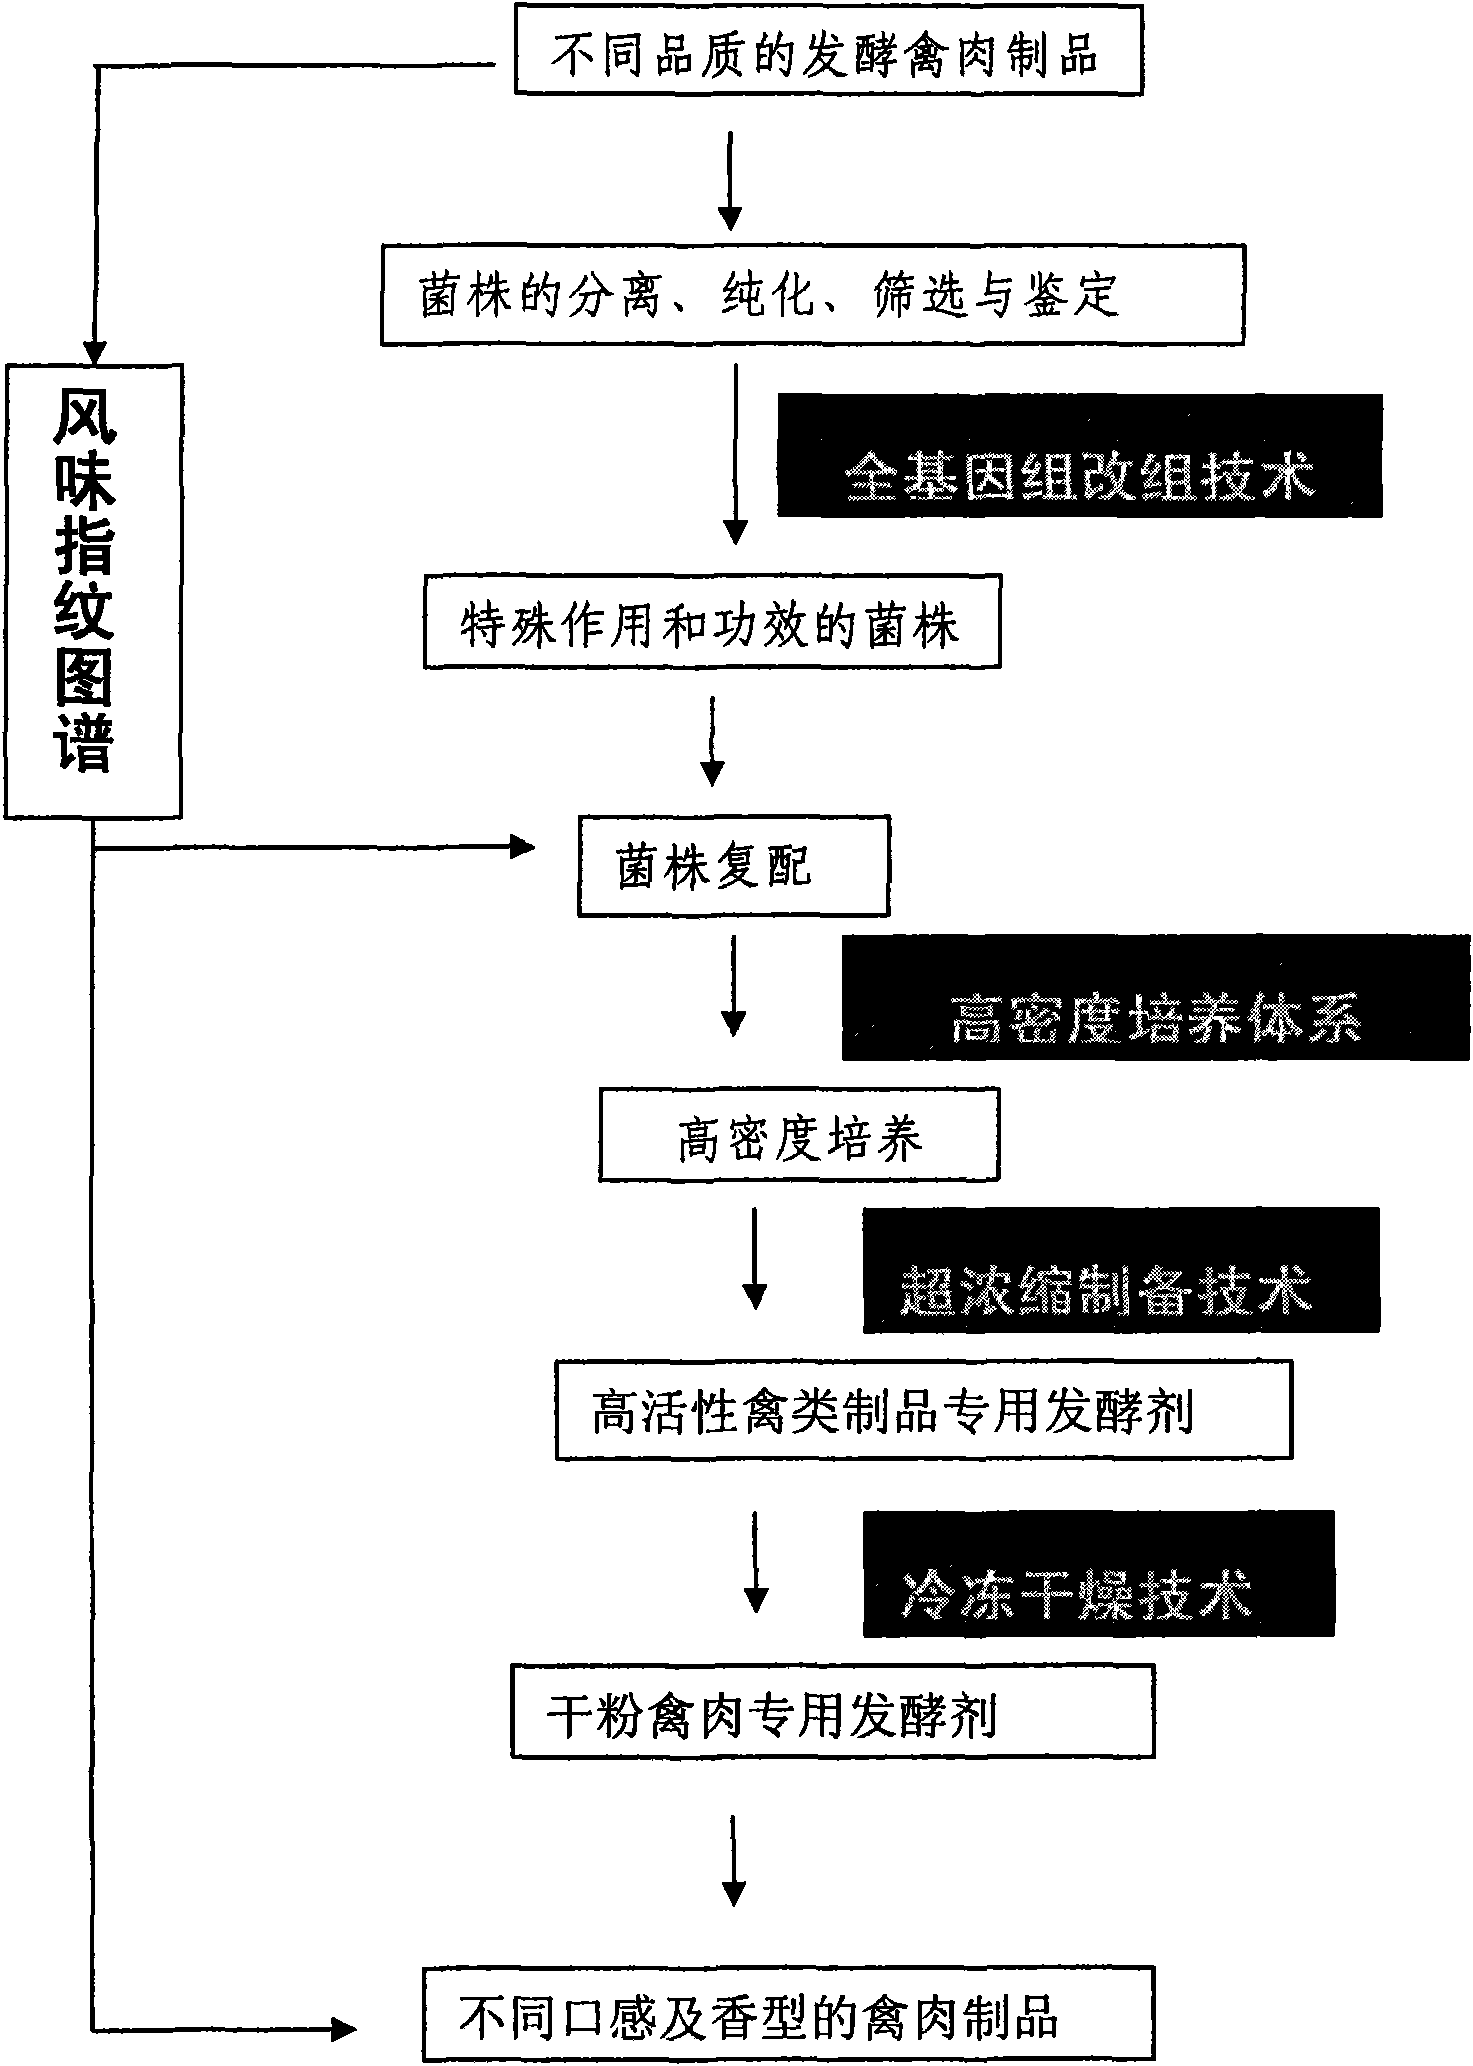 Production method of characteristic fermented poultry meat products